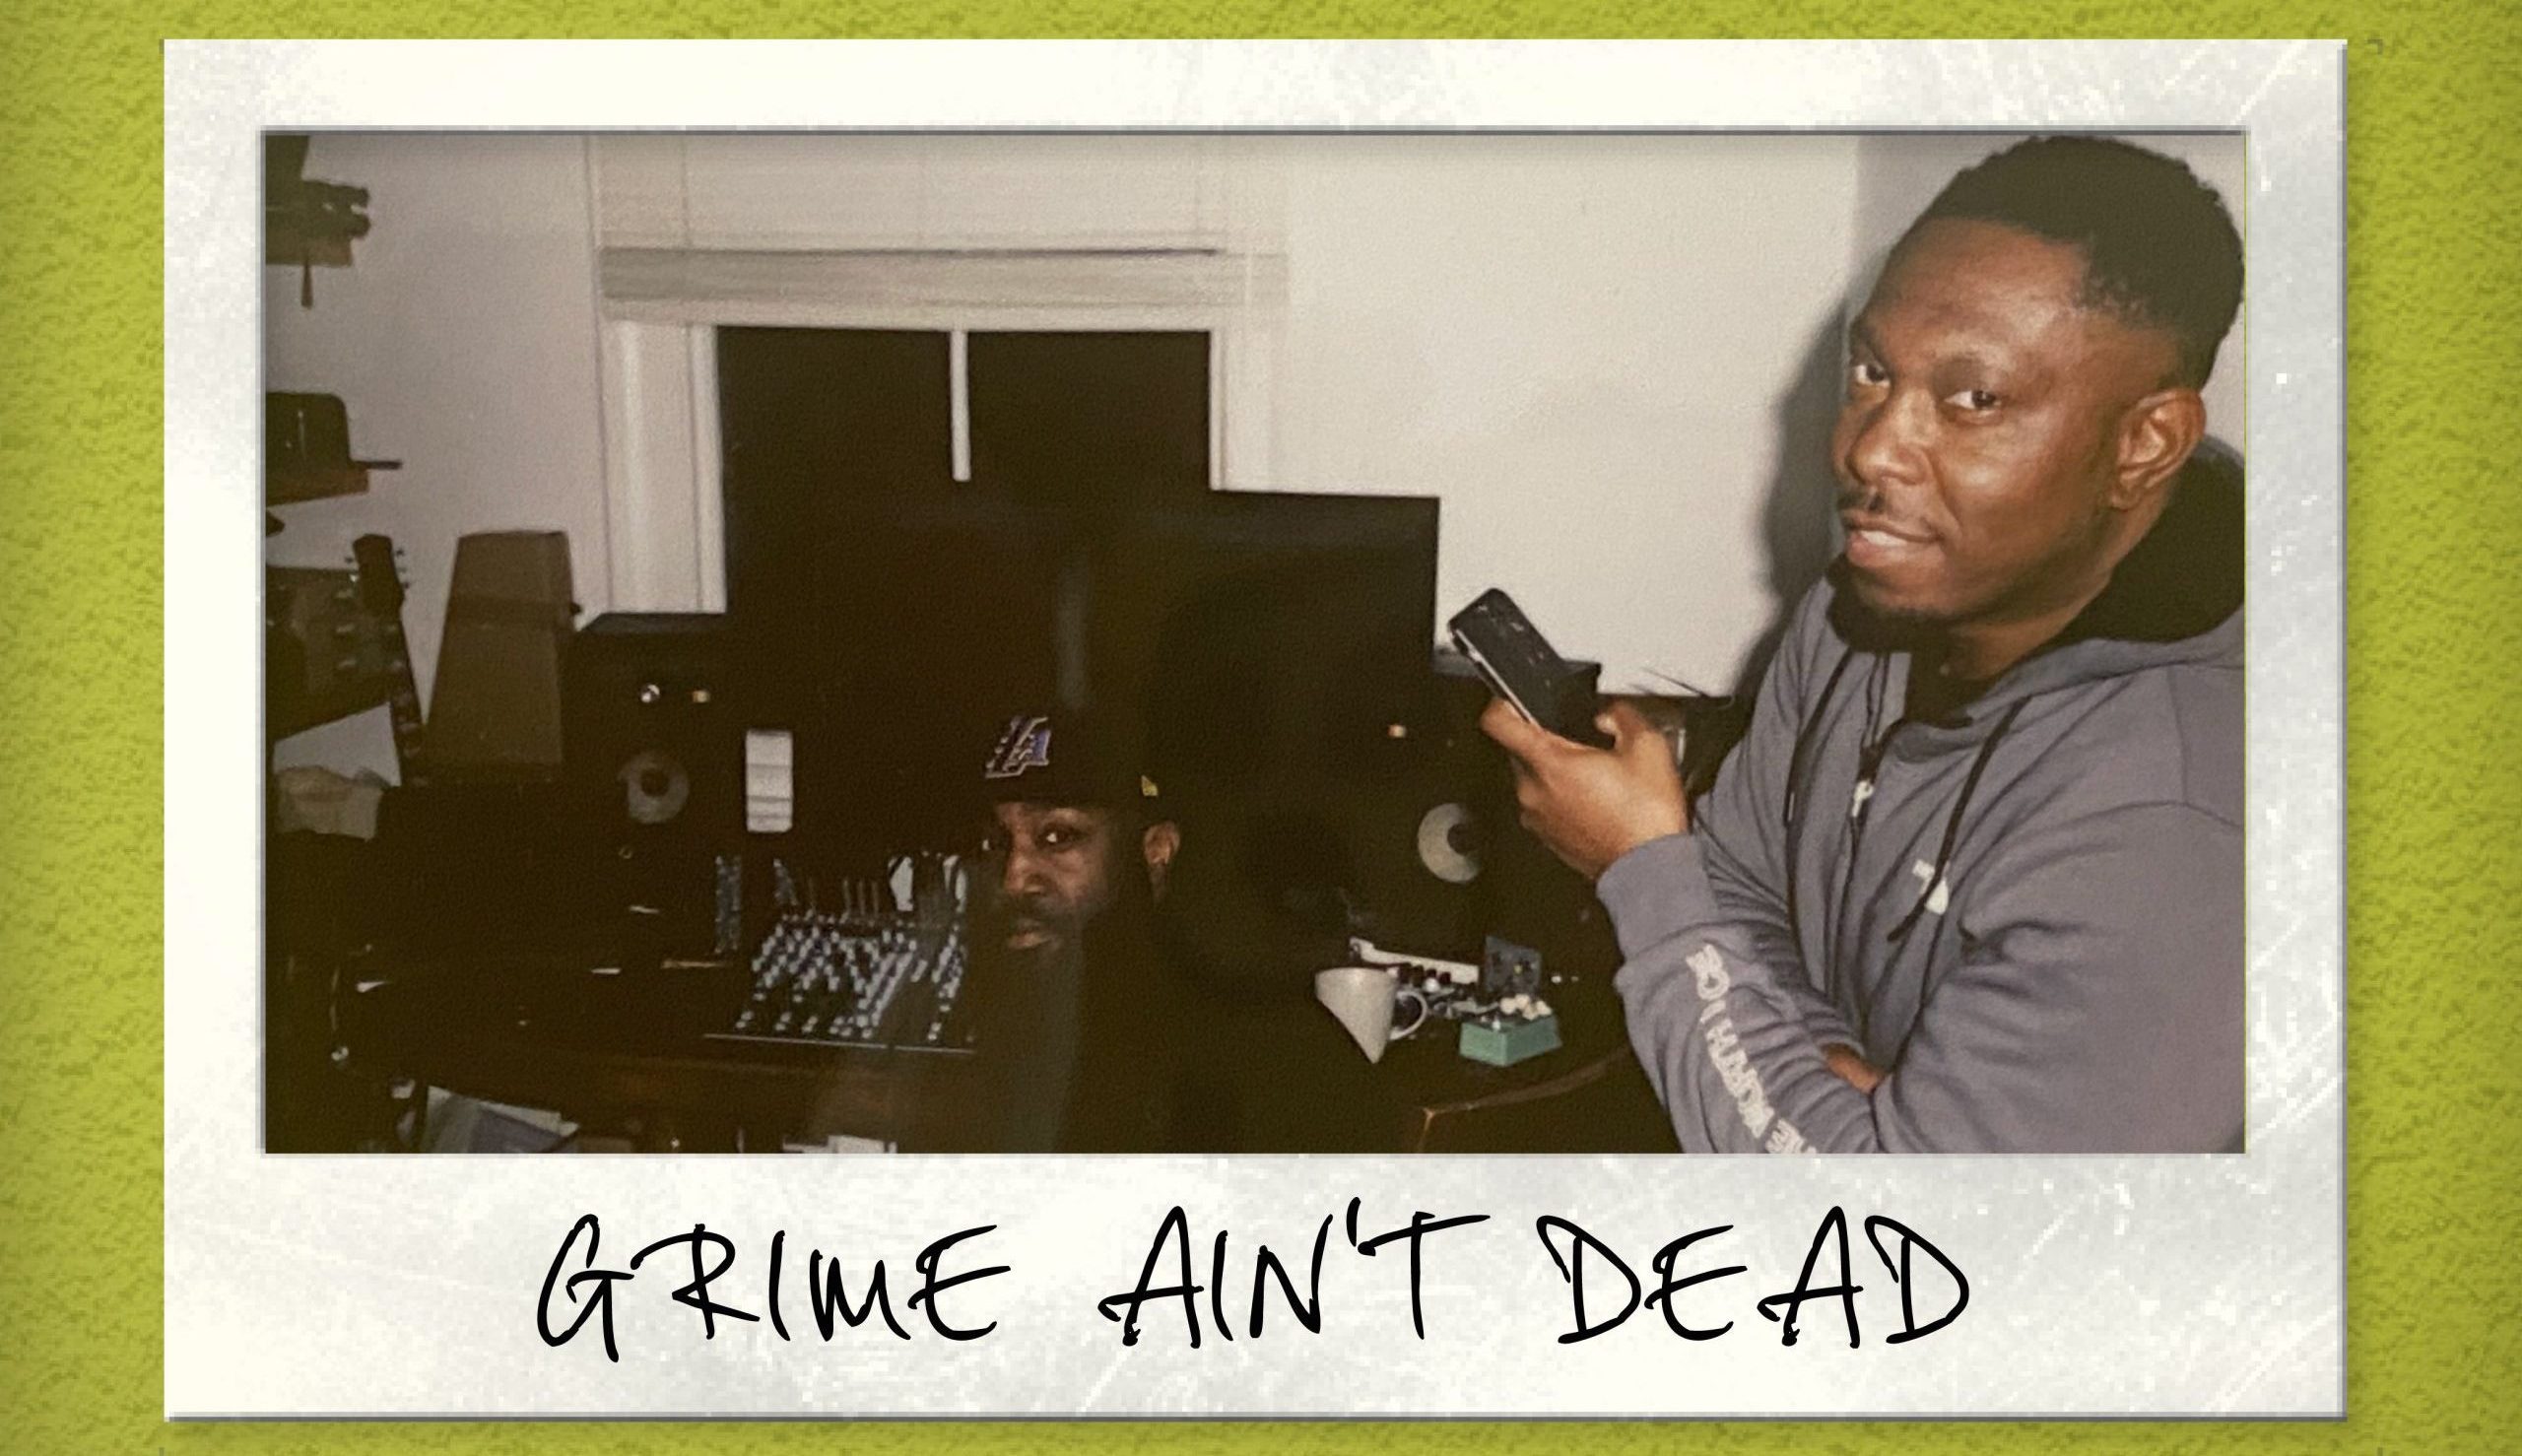 Silencer and Dizzee Rascal join forces in new single ‘Grime Ain’t Dead’